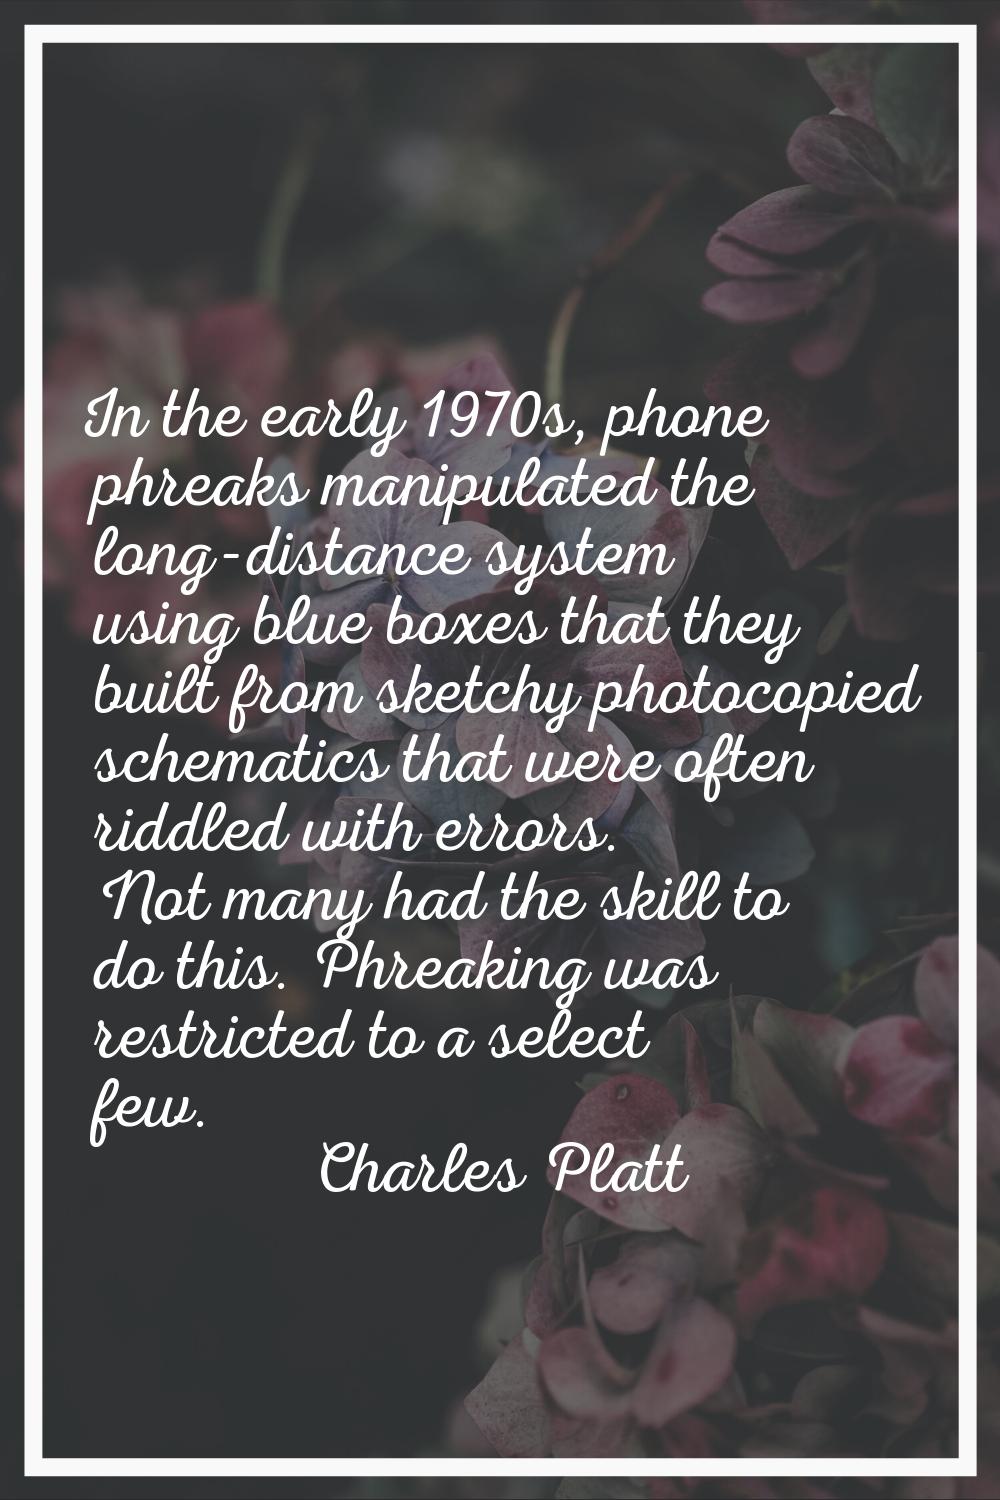 In the early 1970s, phone phreaks manipulated the long-distance system using blue boxes that they b